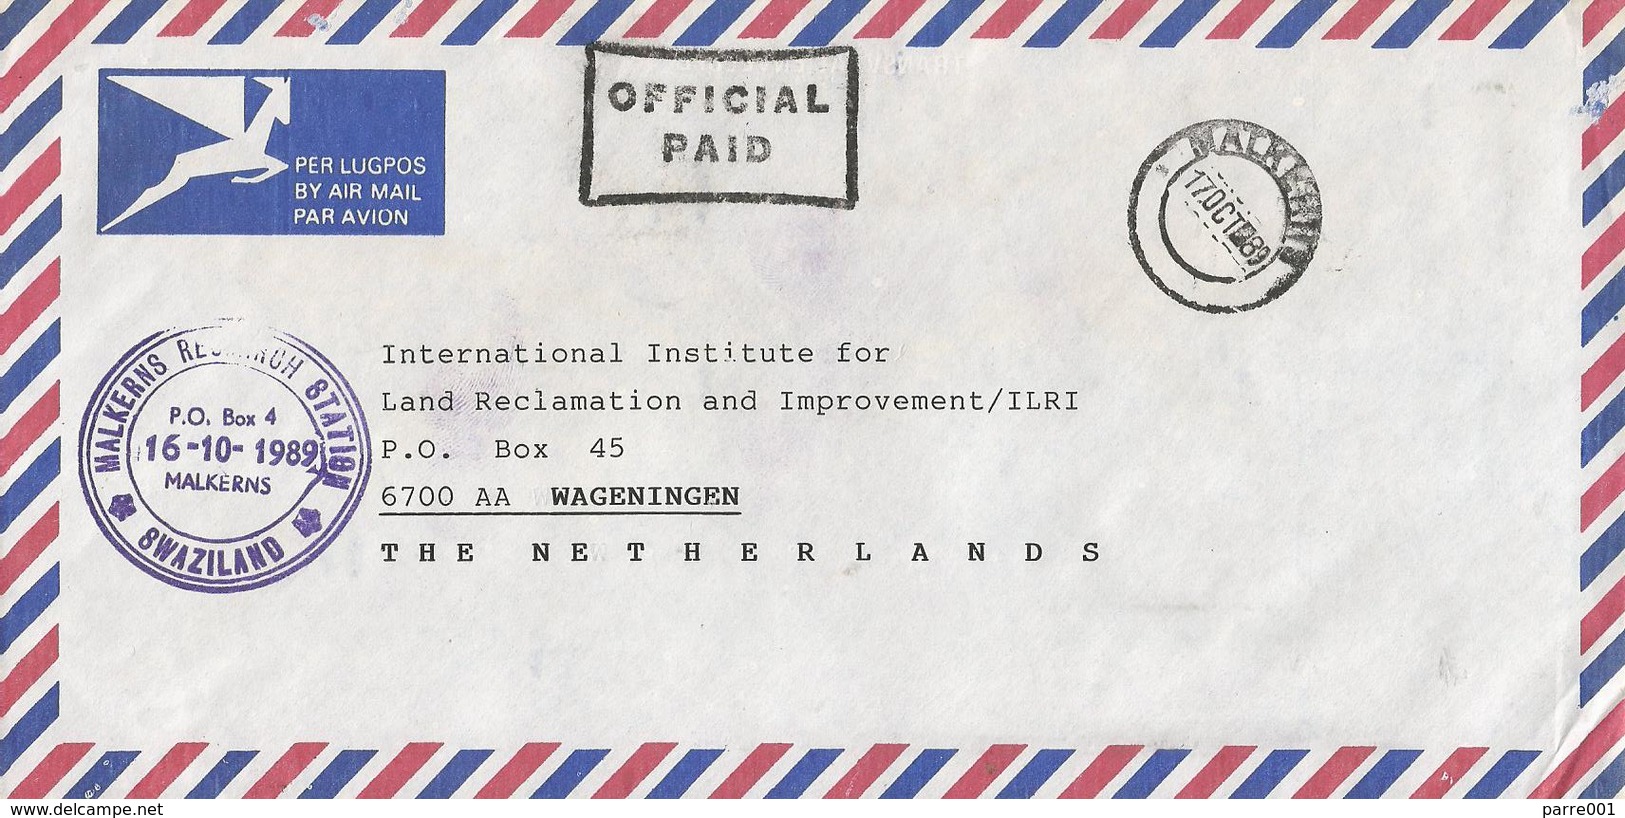 Swaziland 1989 Malkerns Unfranked Official Paid Cover - Swaziland (1968-...)